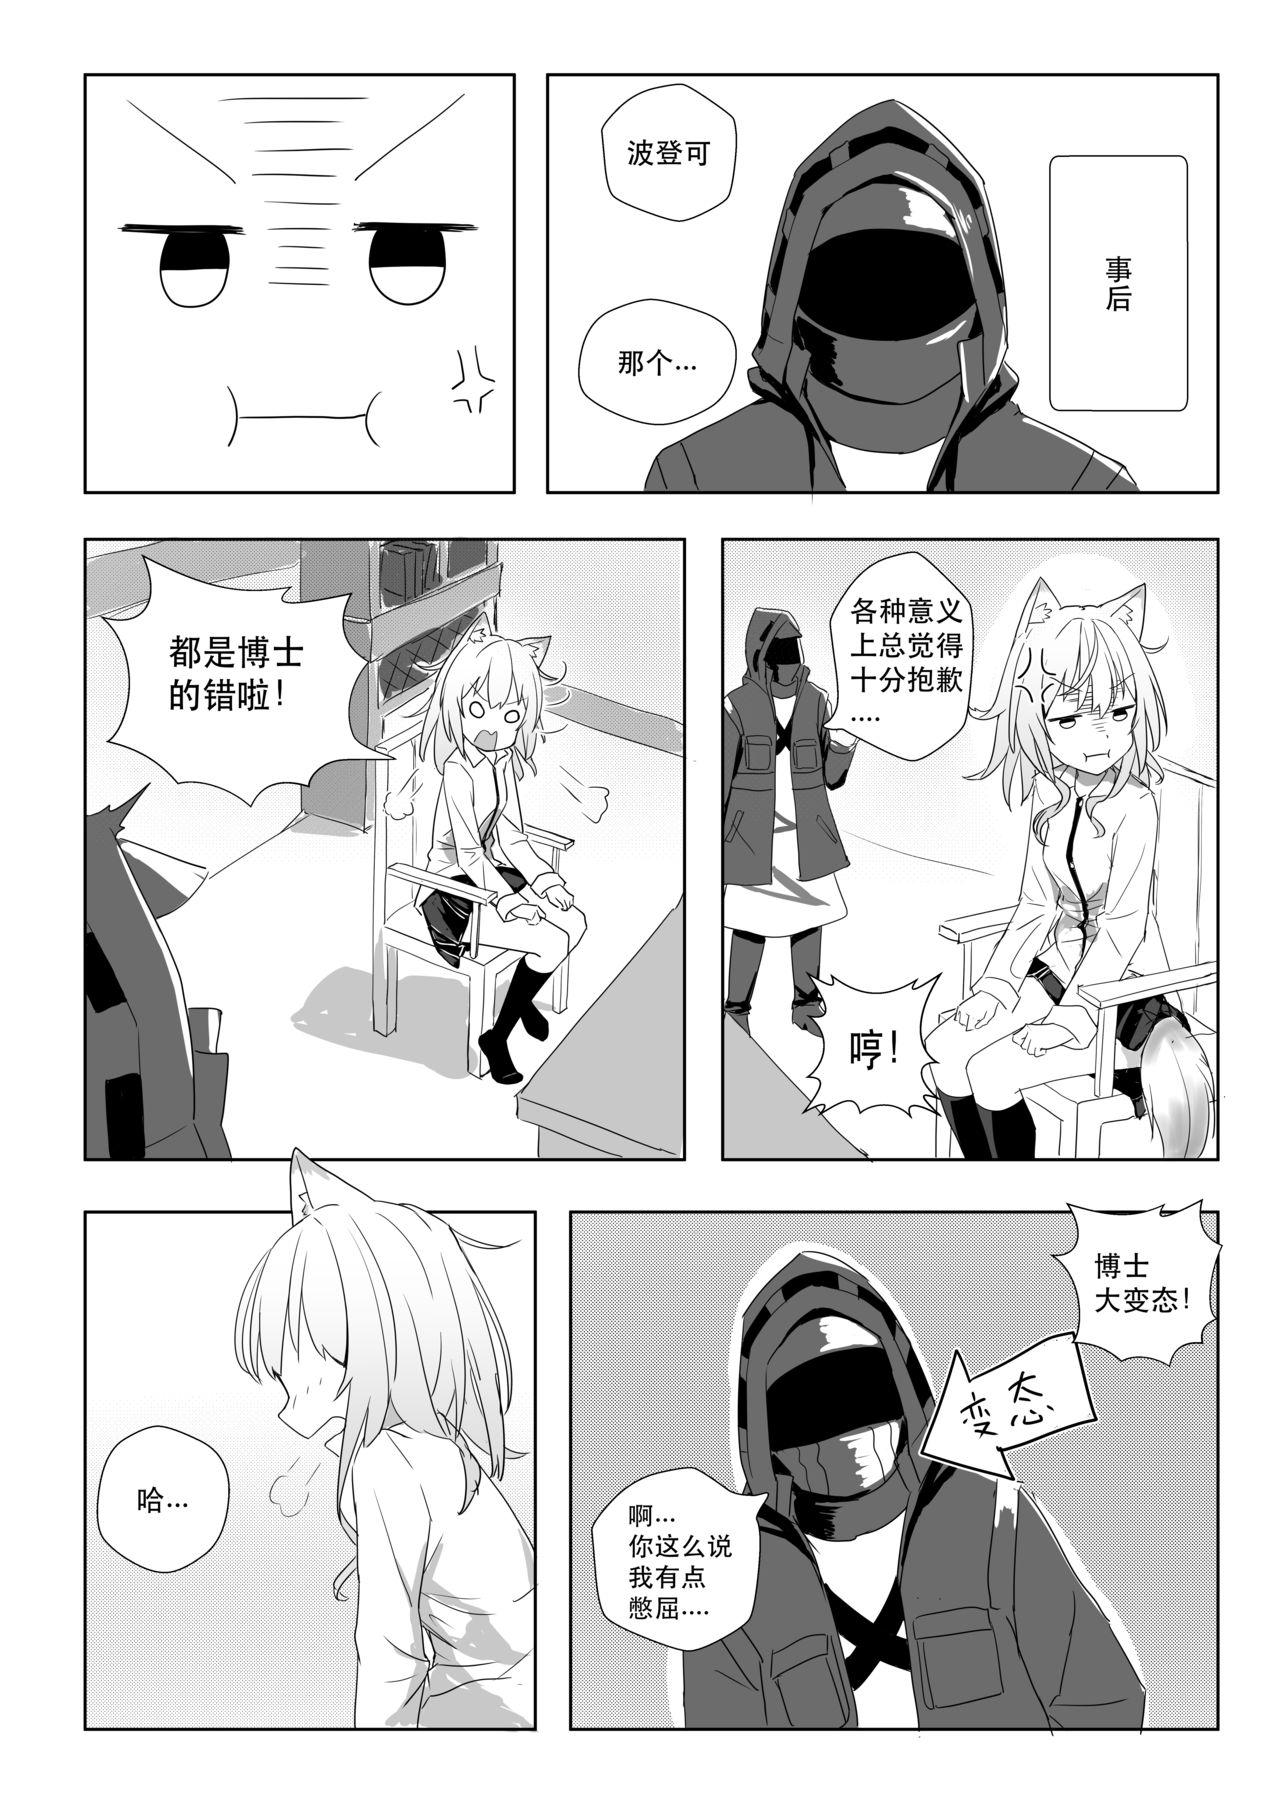 Colombian 发情的狗狗波登可 - Arknights Adolescente - Page 9